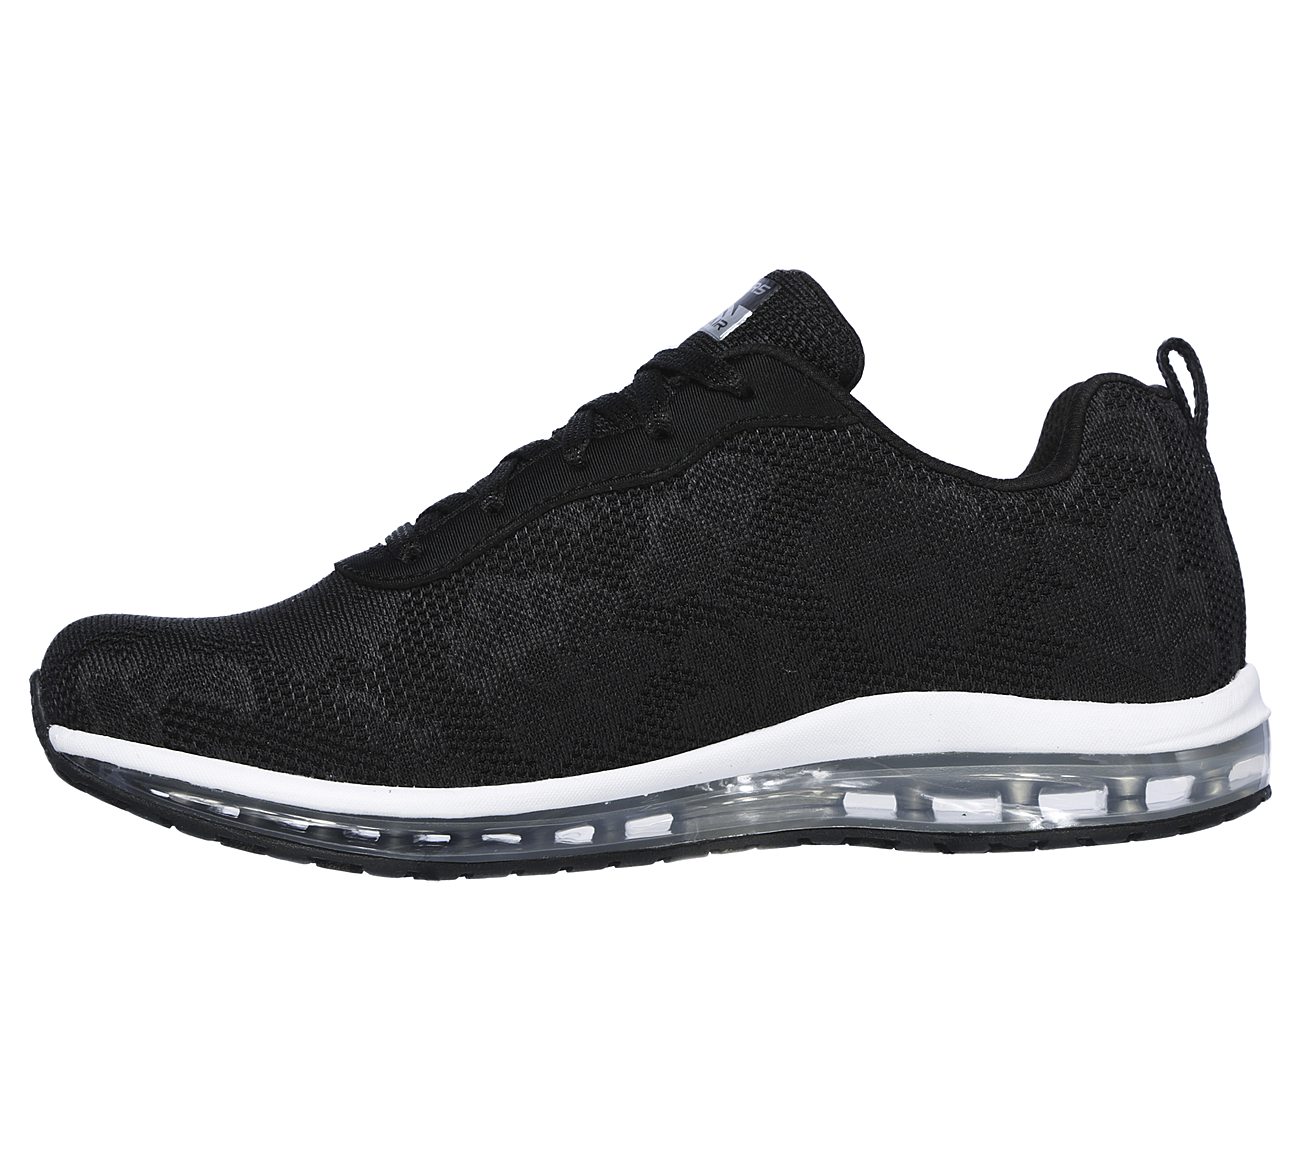 SKECHERS Skech-Air Extreme - Walkout 